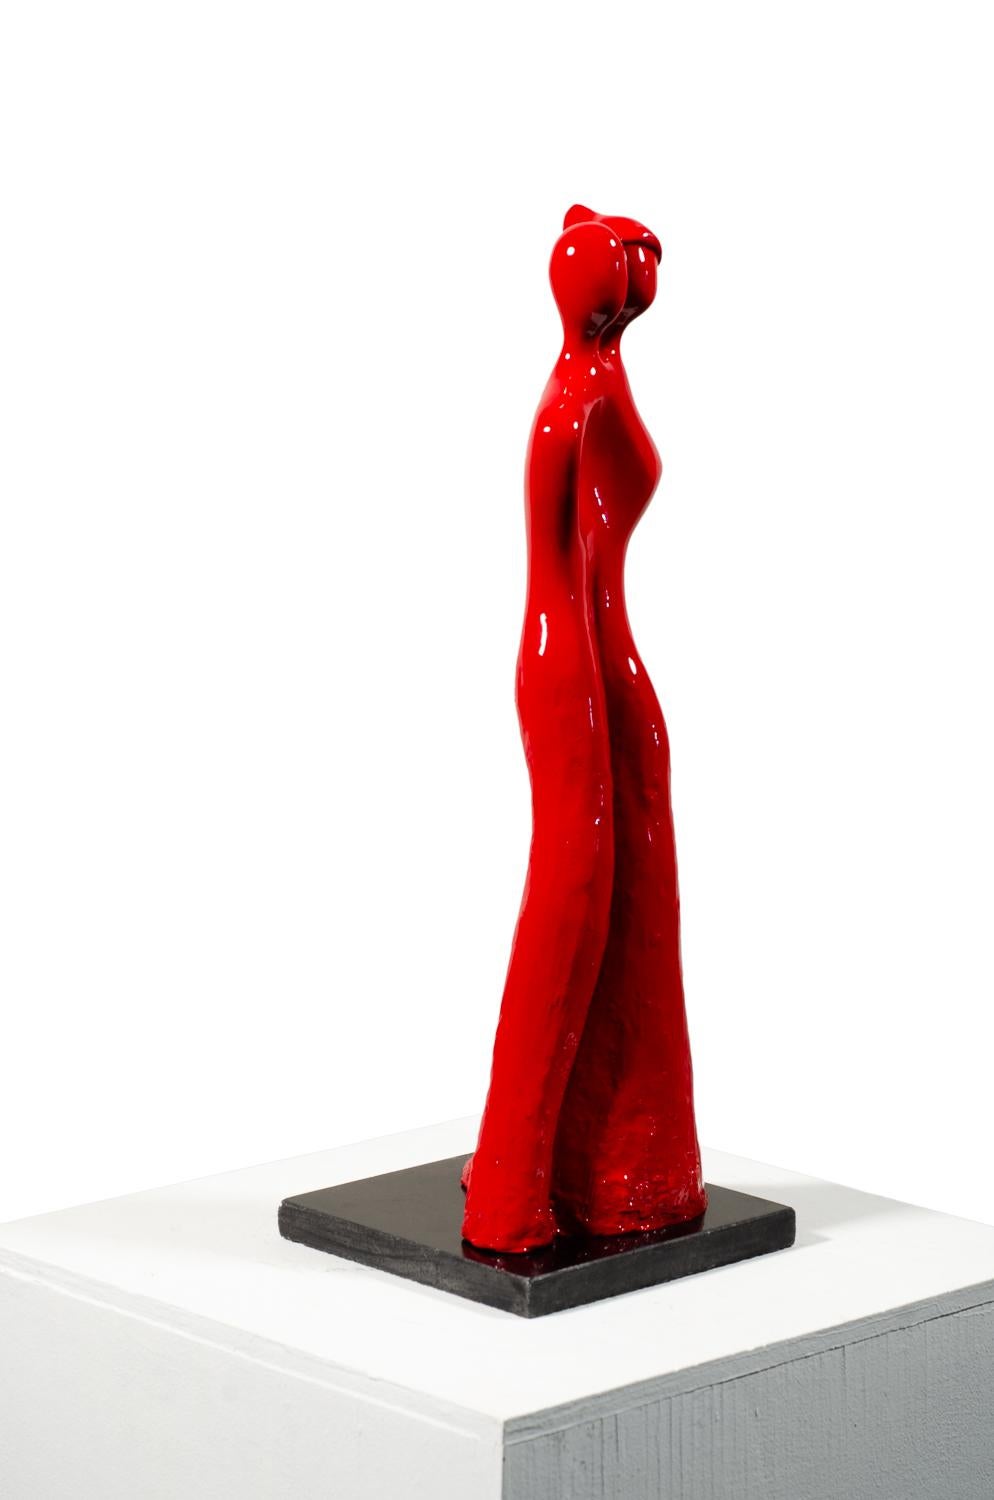 Soul Mates #1 (in red) When in love, their souls and bodies fuse into just one. - Contemporary Sculpture by Beatriz Gerenstein